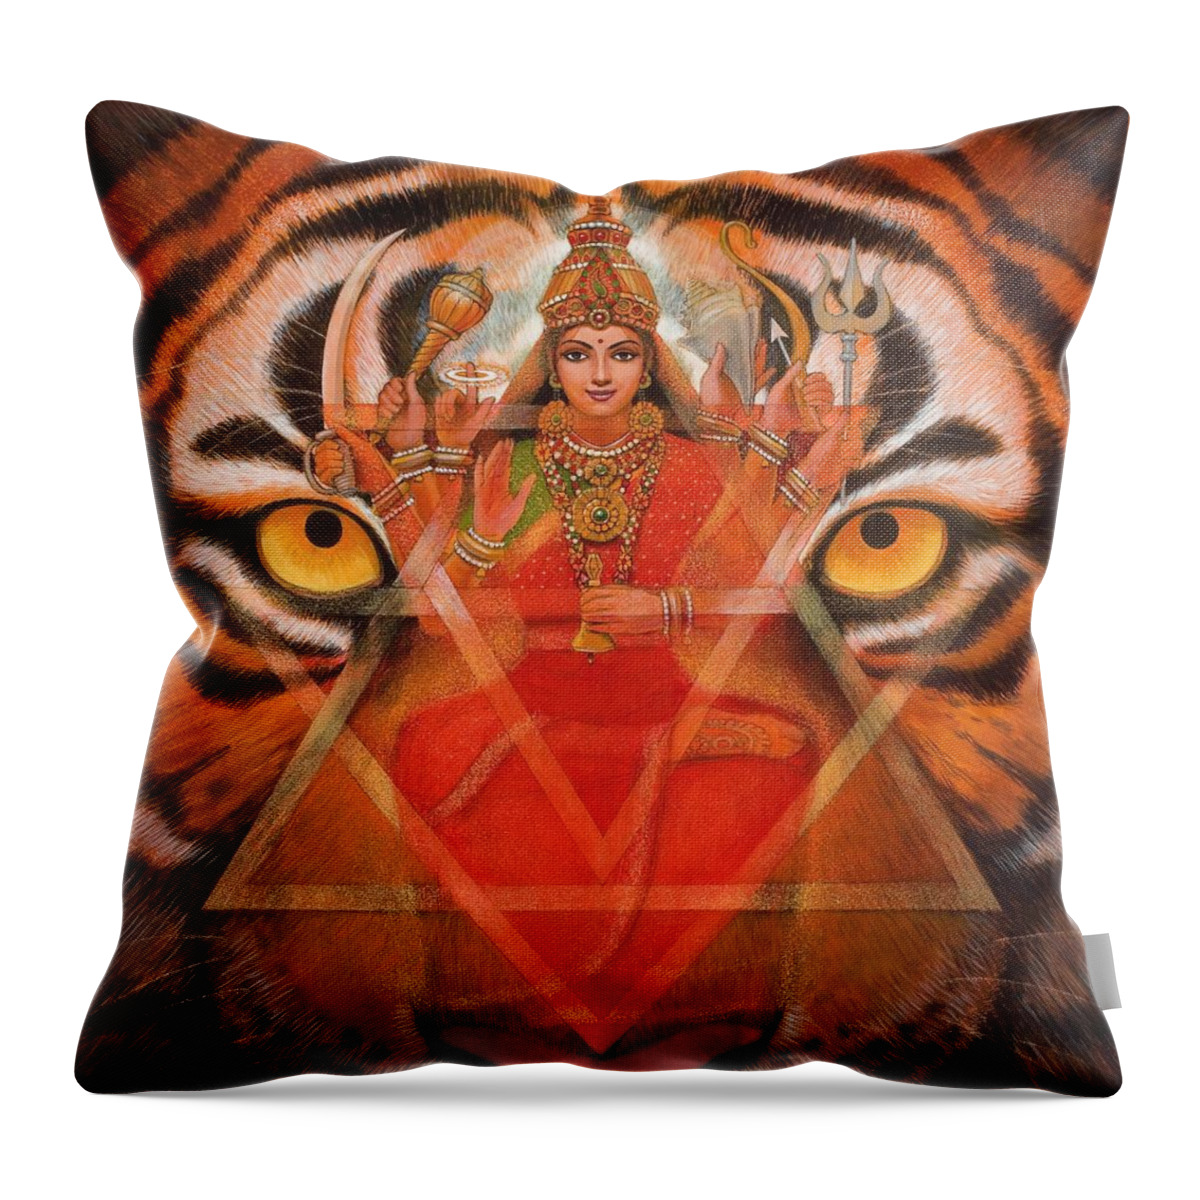 Durga Throw Pillow featuring the painting Goddess Durga by Sue Halstenberg